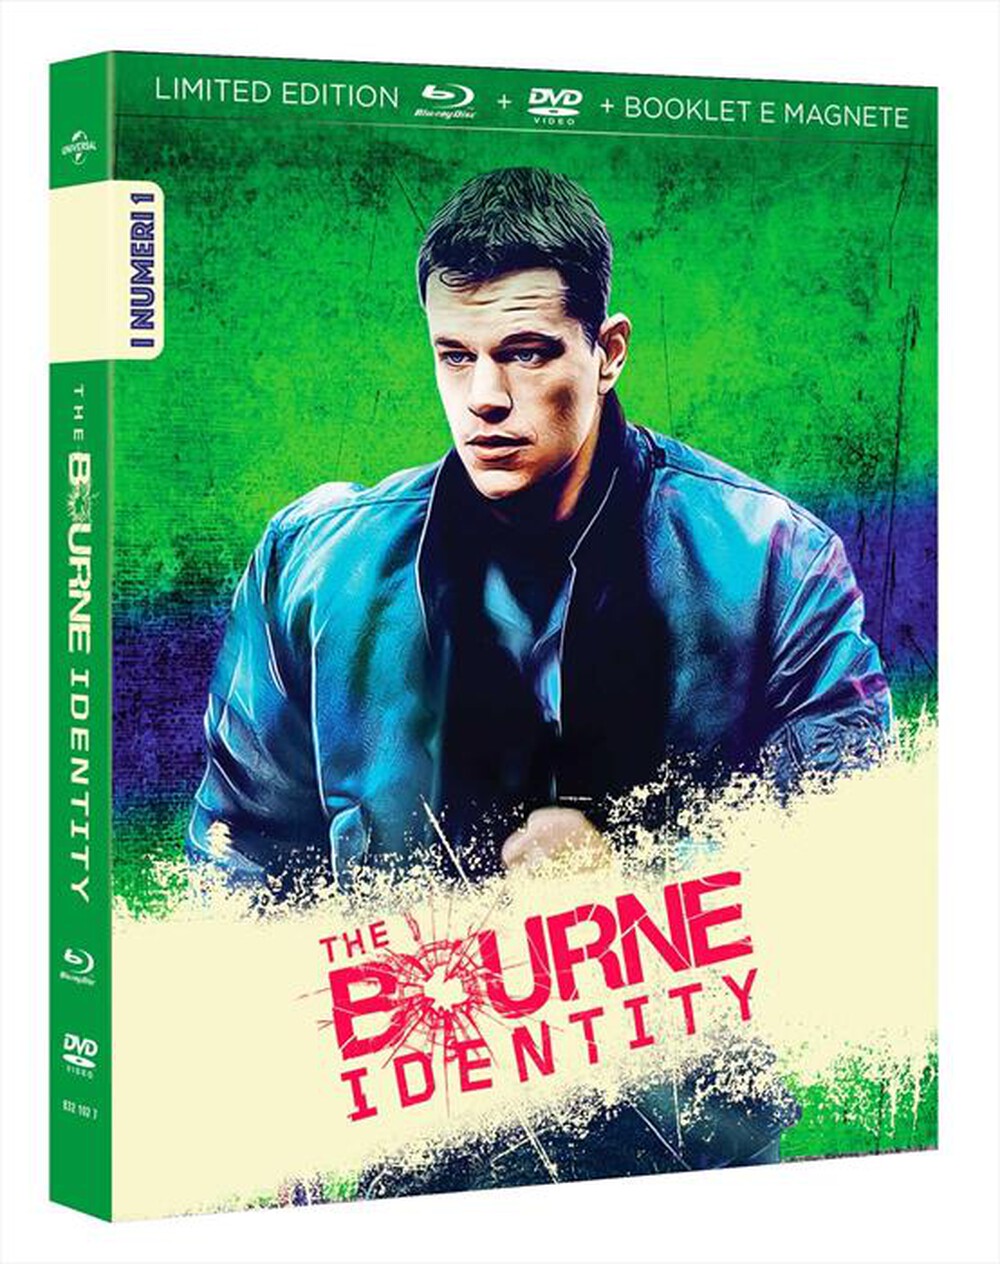 "PARAMOUNT PICTURE - Bourne Identity (The) (Blu-Ray+Dvd)"